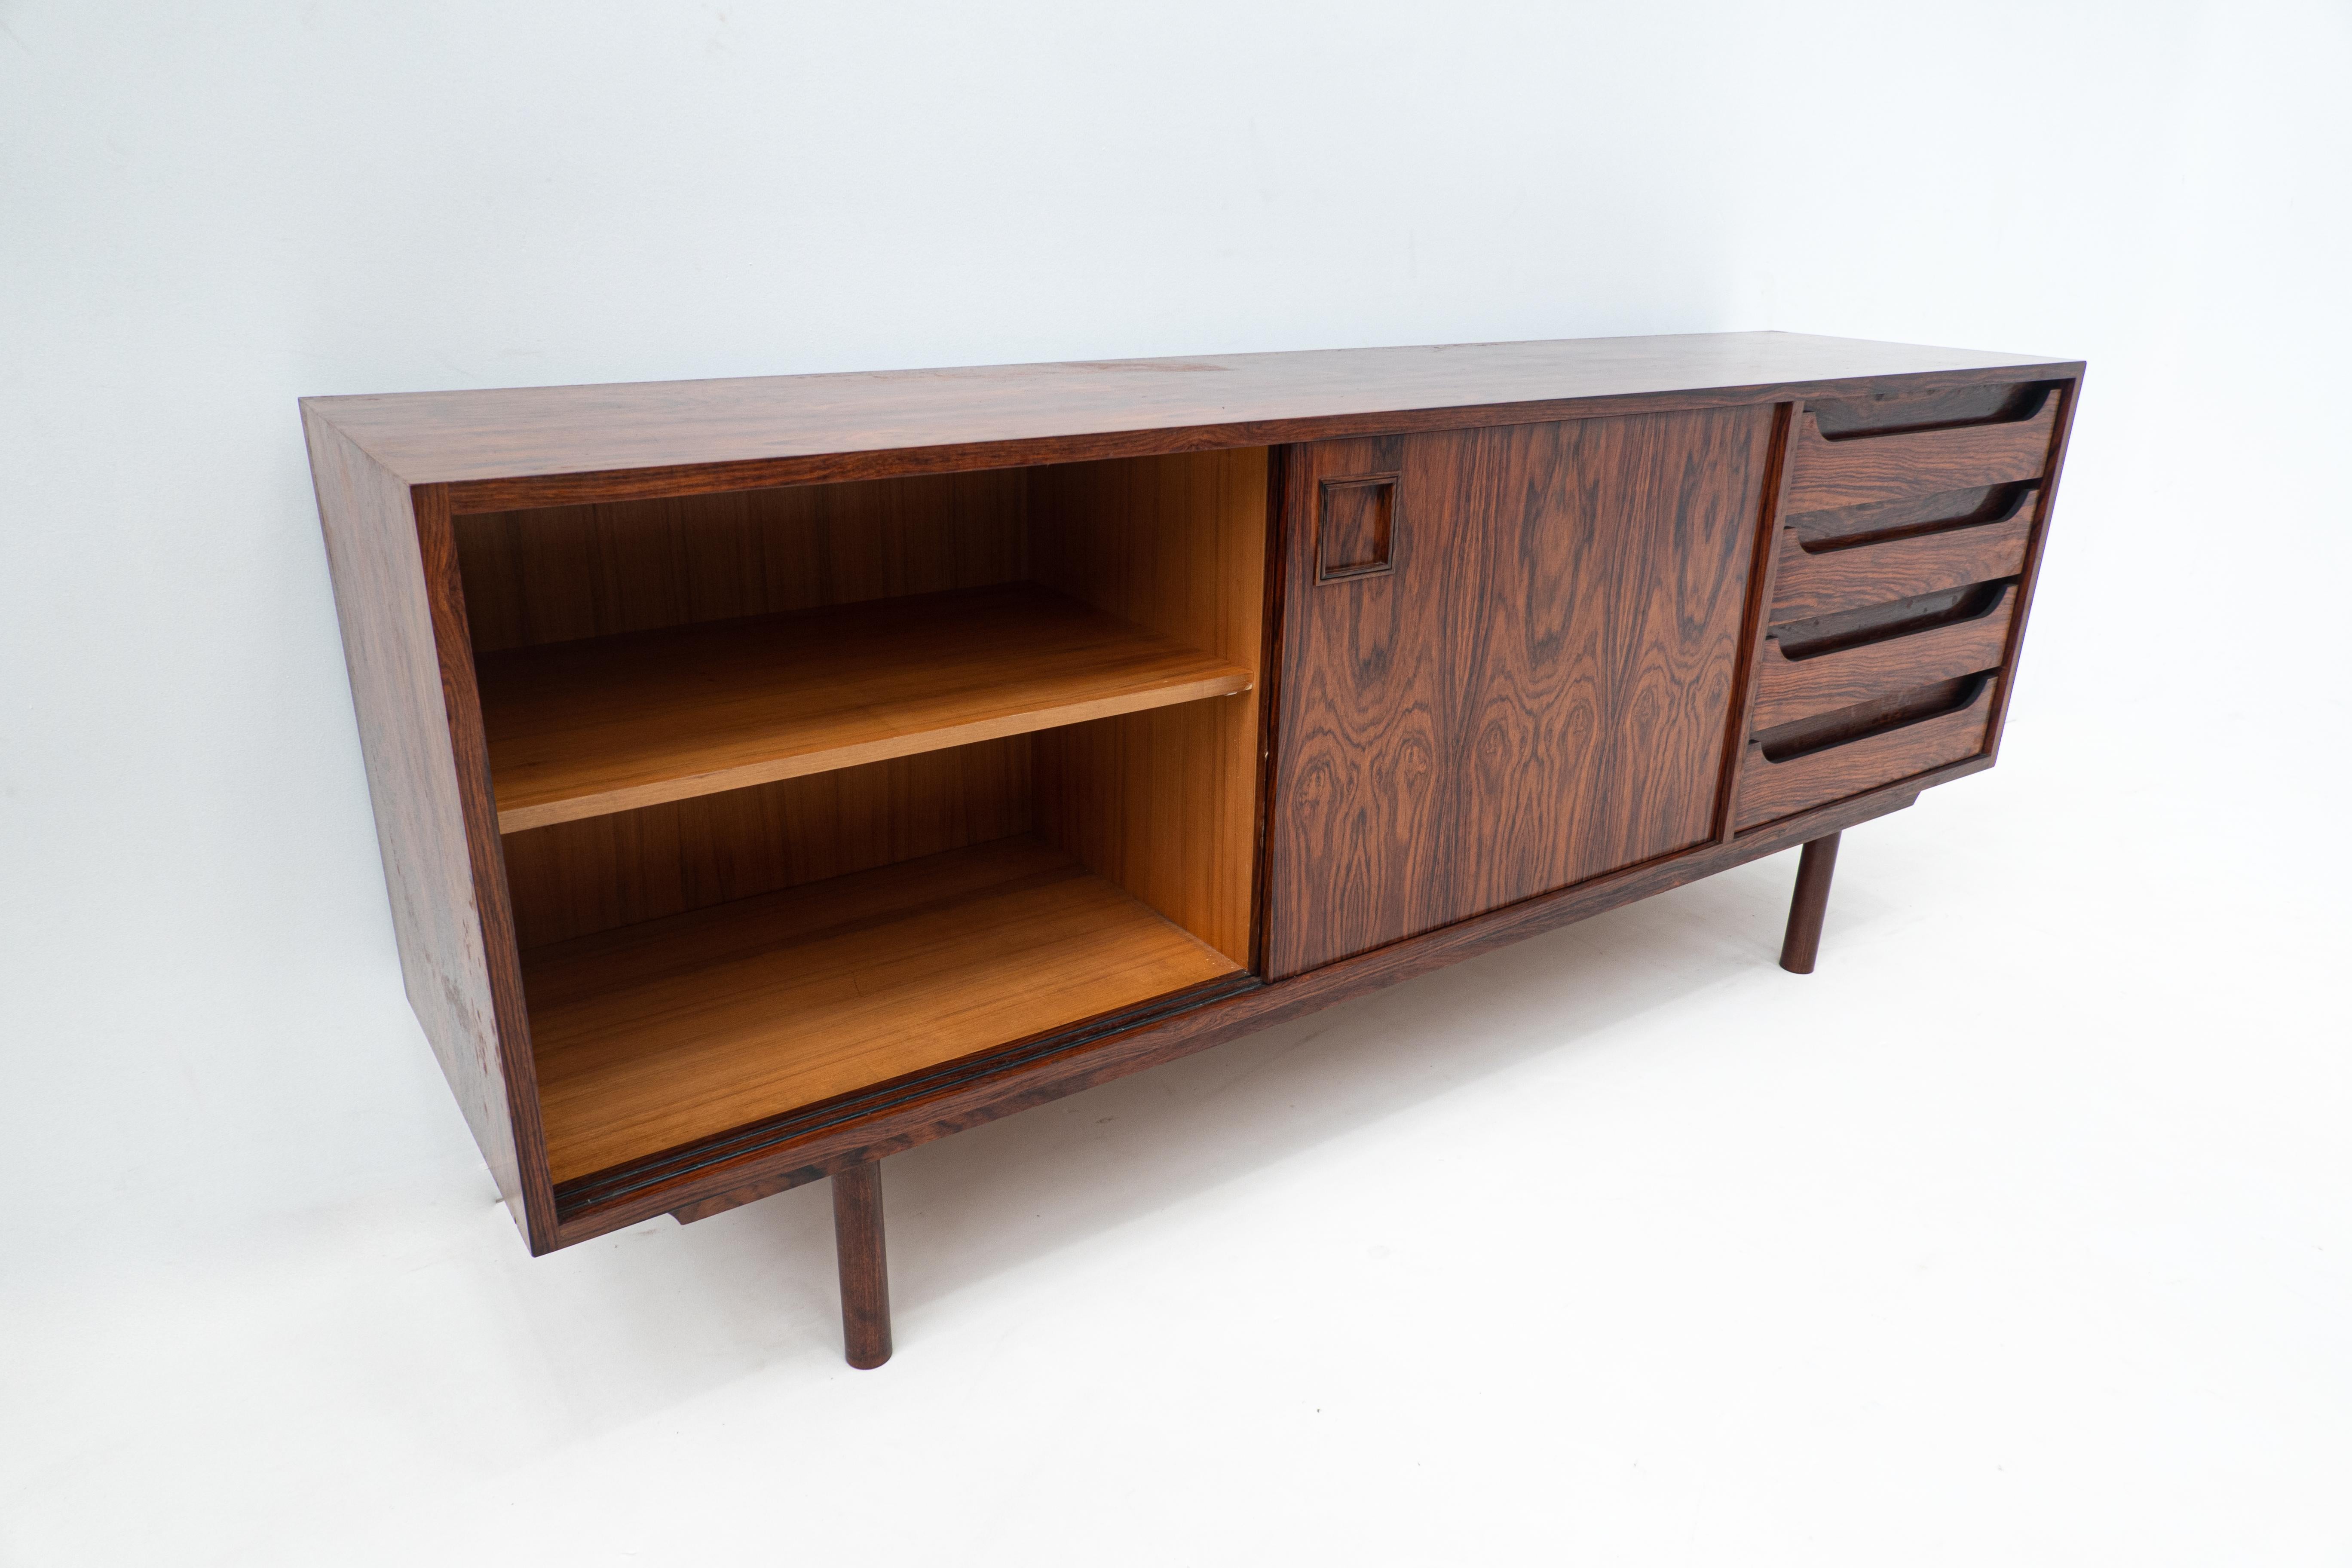 Late 20th Century Mid-Century Modern Wooden Sideboard with Drawers and Sliding Doors, Italy 1970s